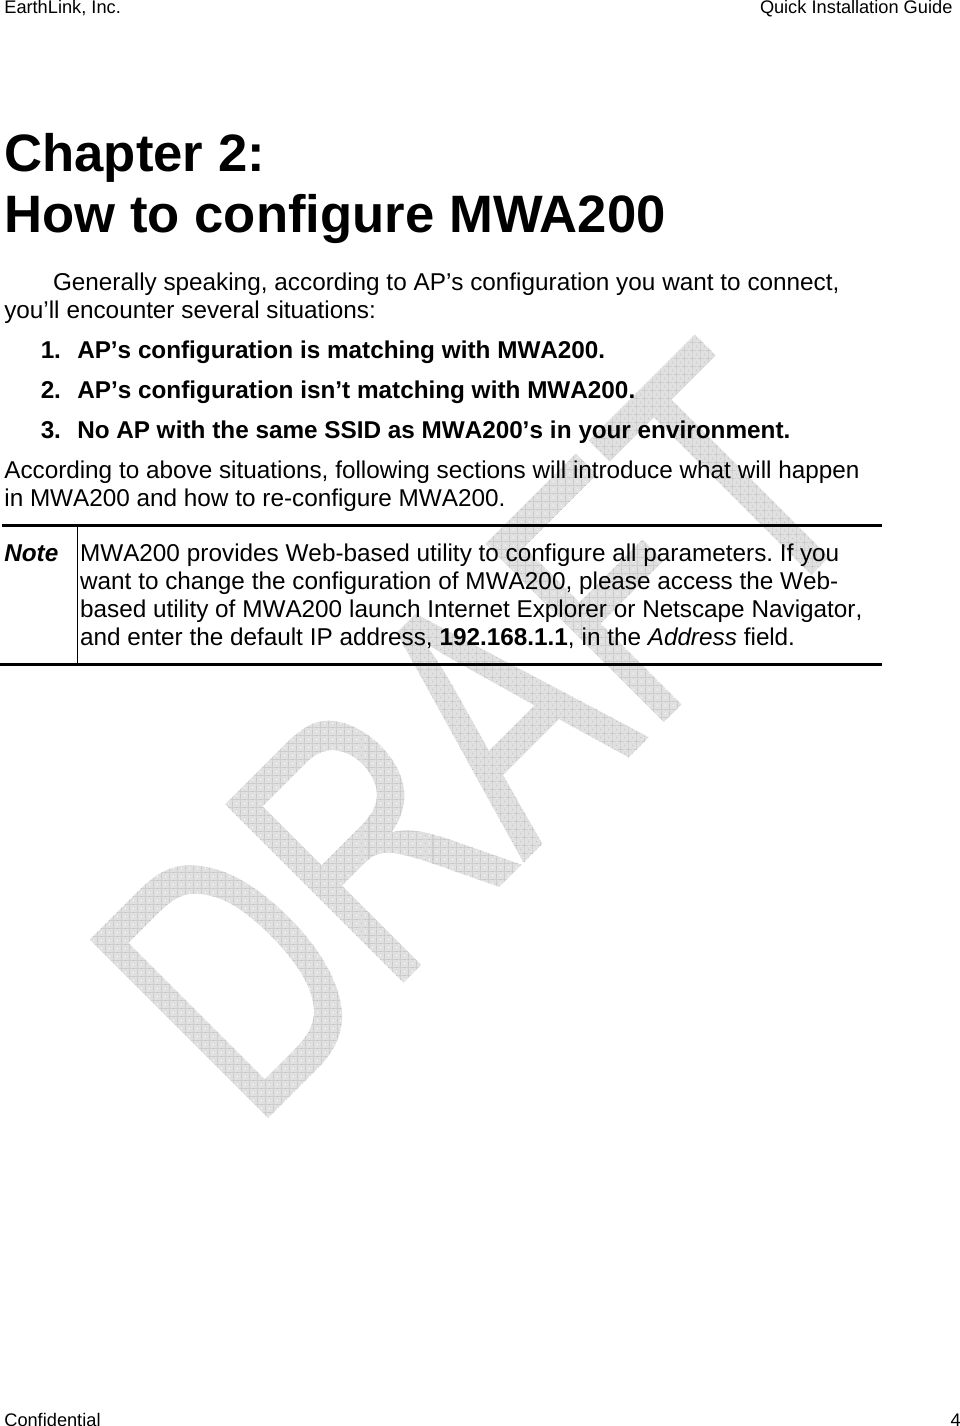 EarthLink, Inc.    Quick Installation Guide    Confidential   4  Chapter 2: How to configure MWA200 Generally speaking, according to AP’s configuration you want to connect, you’ll encounter several situations: 1.  AP’s configuration is matching with MWA200. 2.  AP’s configuration isn’t matching with MWA200. 3.  No AP with the same SSID as MWA200’s in your environment. According to above situations, following sections will introduce what will happen in MWA200 and how to re-configure MWA200. Note  MWA200 provides Web-based utility to configure all parameters. If you want to change the configuration of MWA200, please access the Web-based utility of MWA200 launch Internet Explorer or Netscape Navigator, and enter the default IP address, 192.168.1.1, in the Address field.  